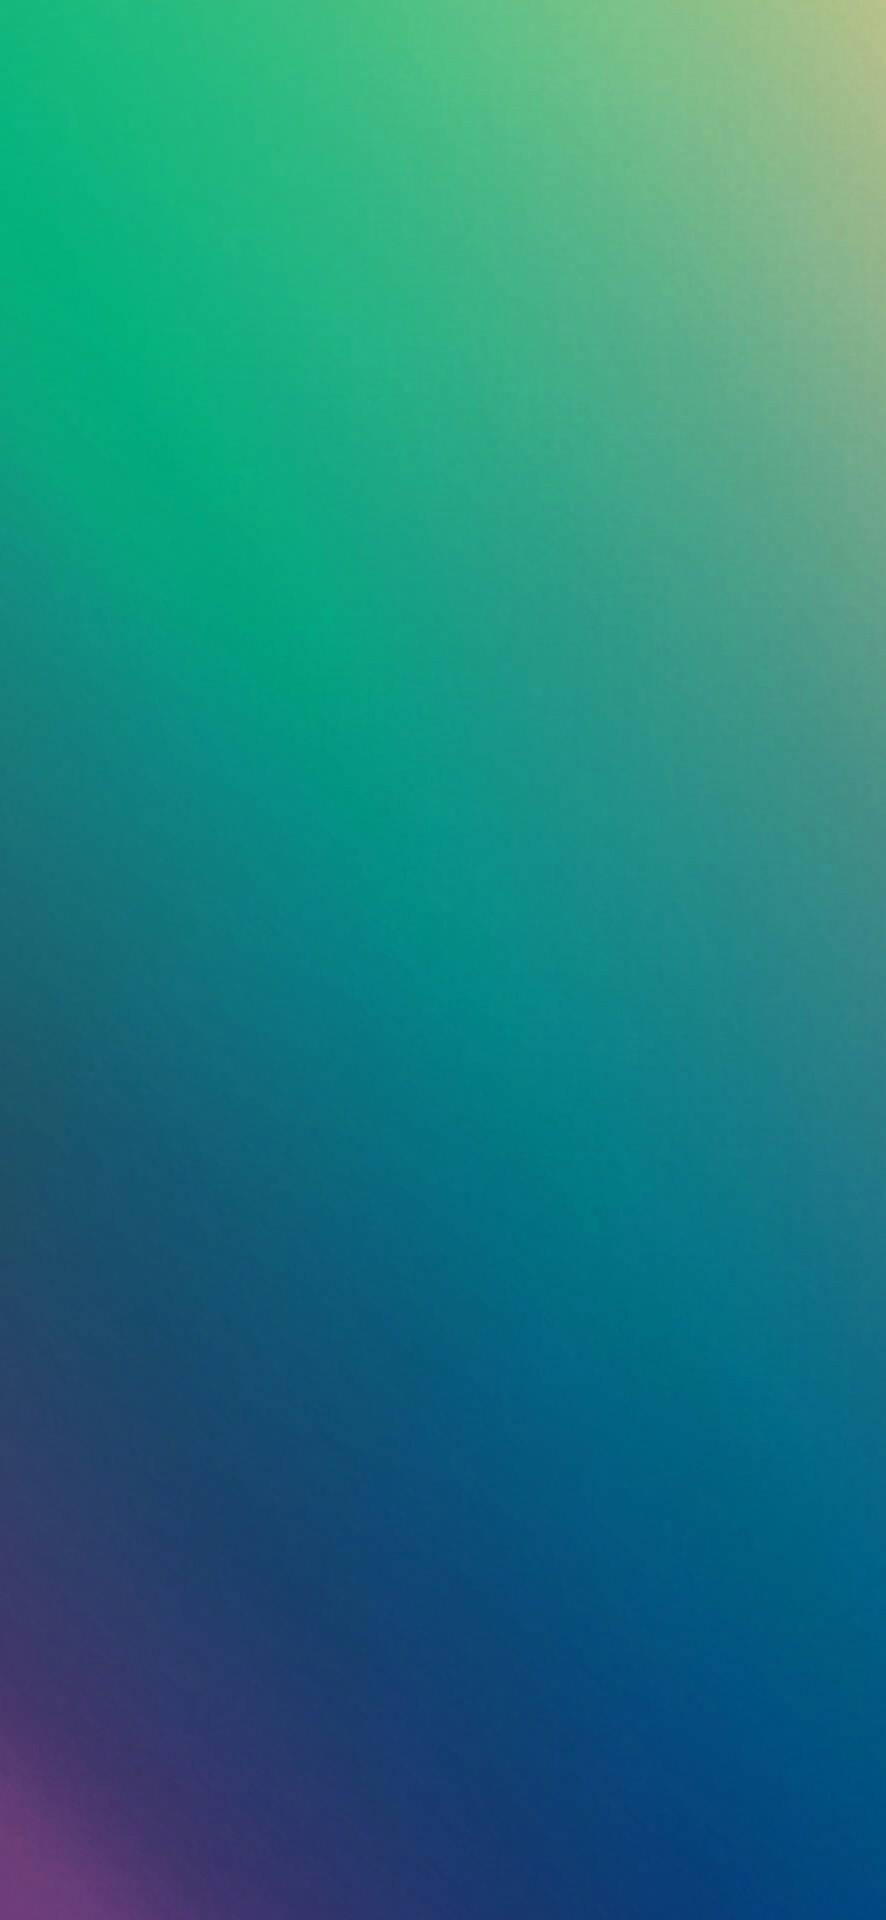 Gradient Background Wallpaper – S136 - Chill-out Wallpapers